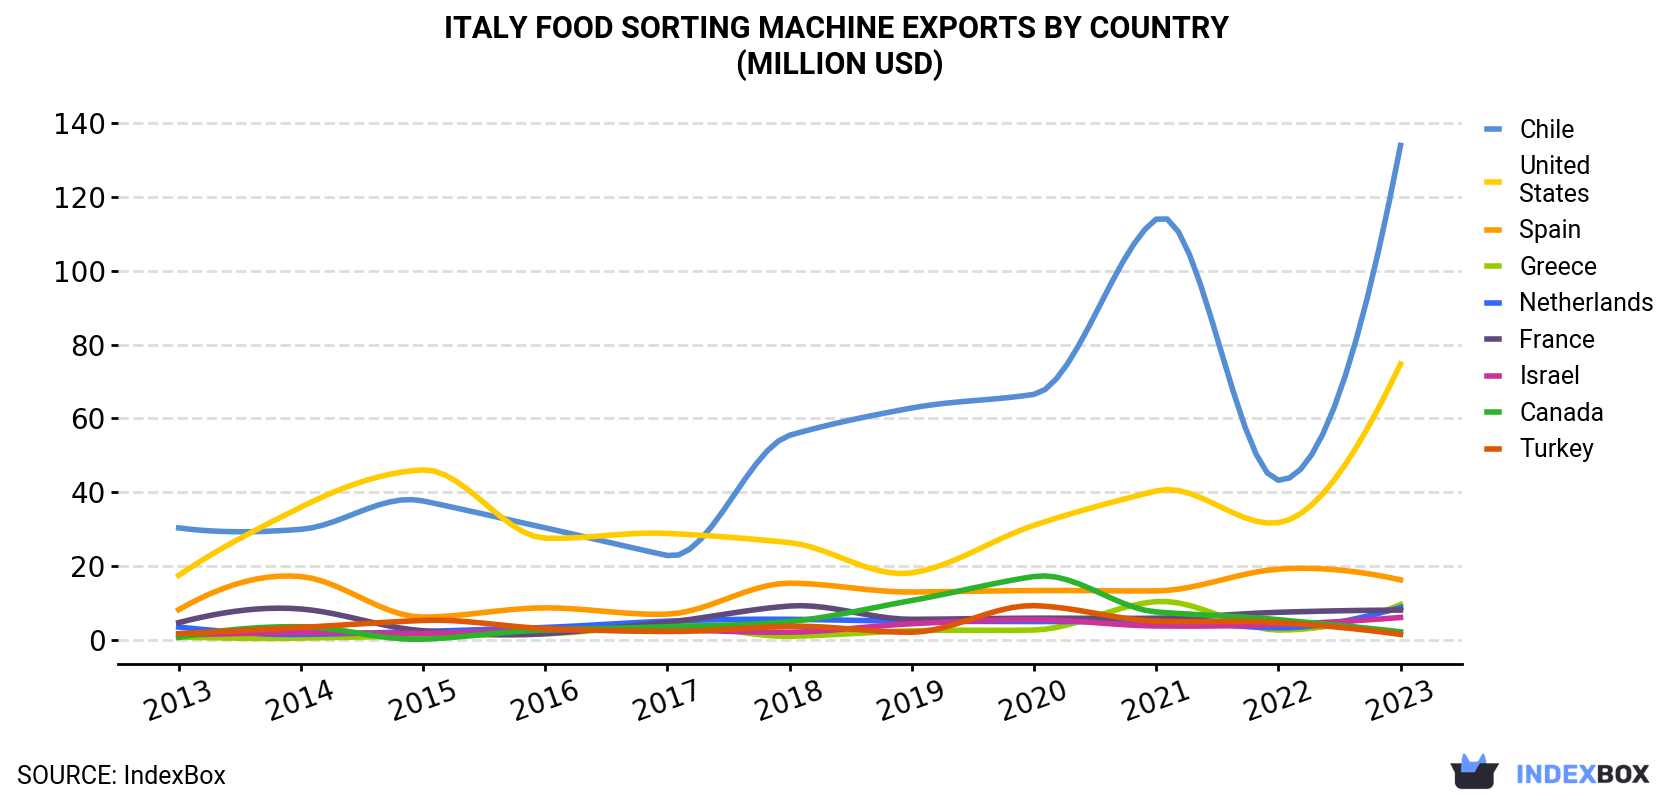 Italy Food Sorting Machine Exports By Country (Million USD)